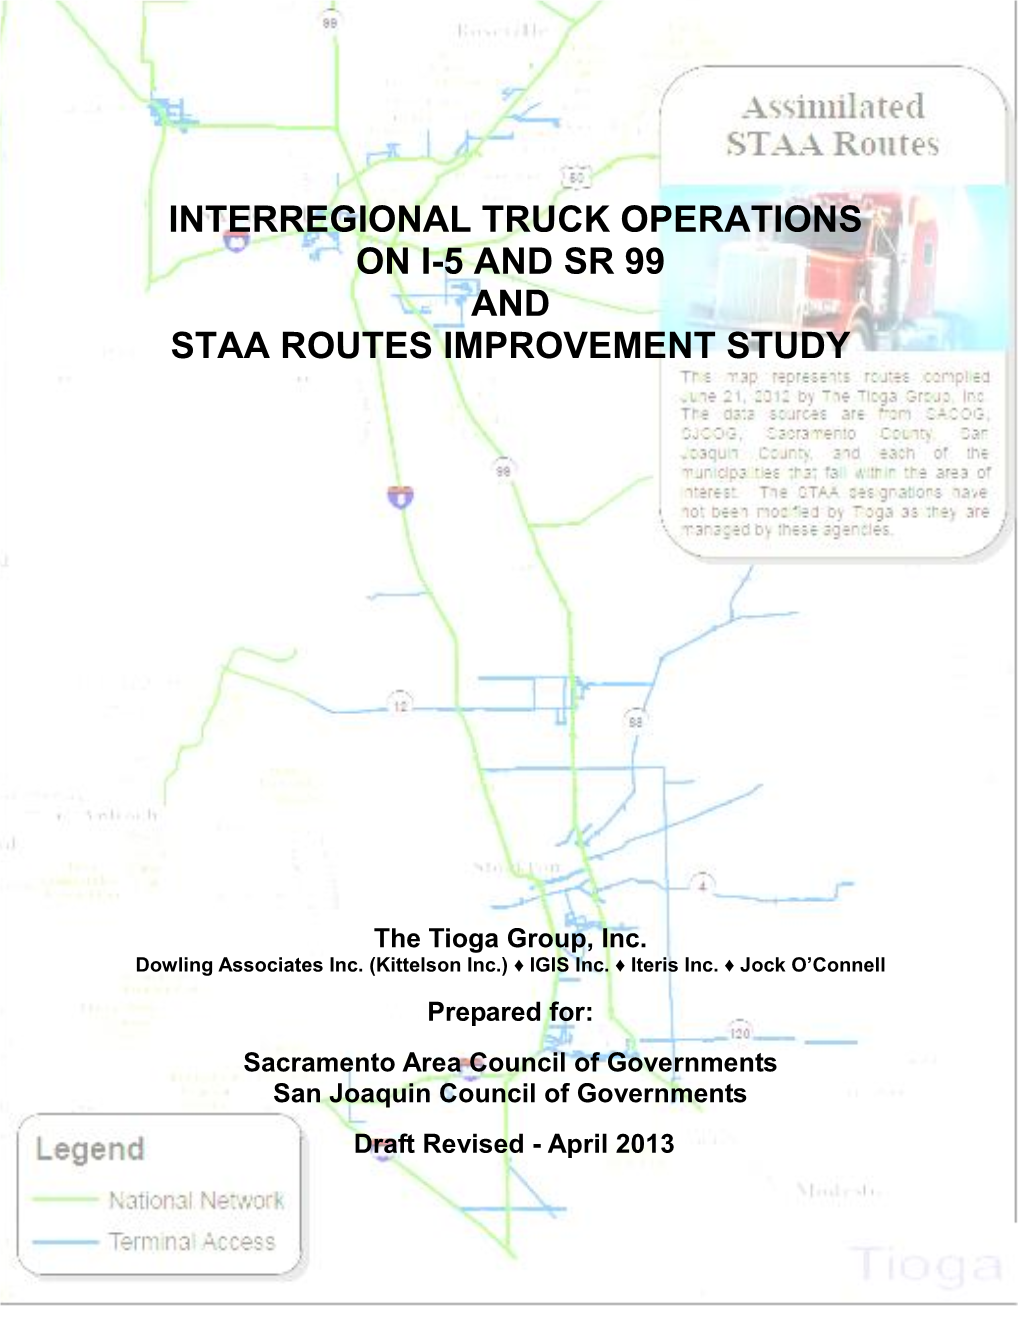 Interregional Truck Operations on I-5 and Sr 99 and Staa Routes Improvement Study